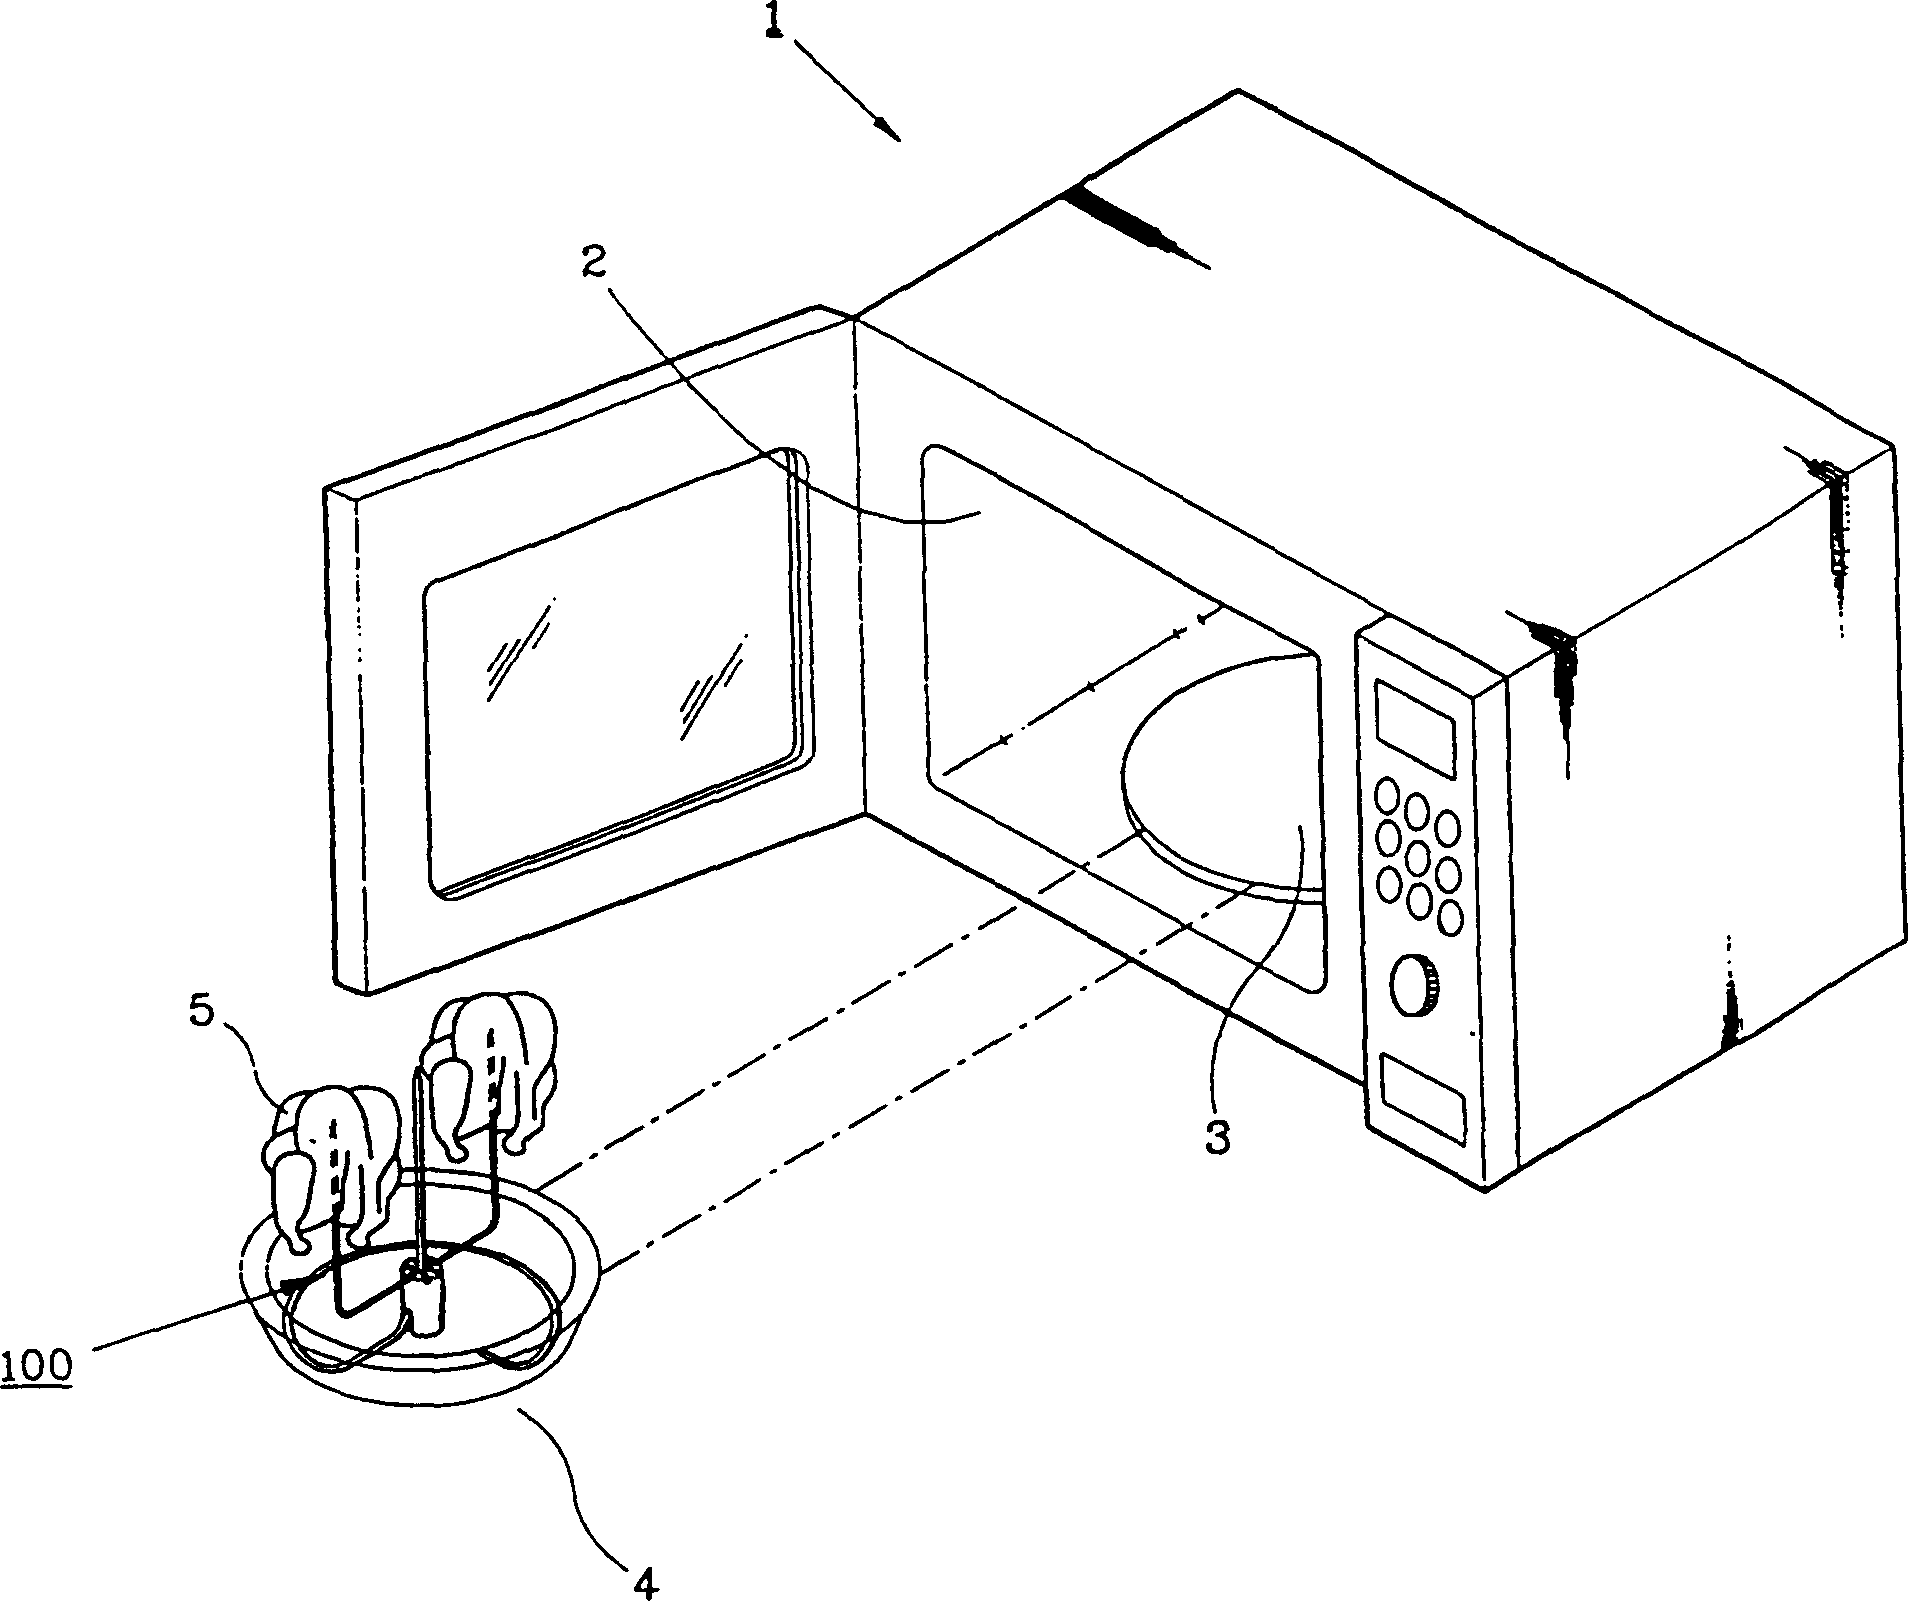 Spitting device for use in microwave oven